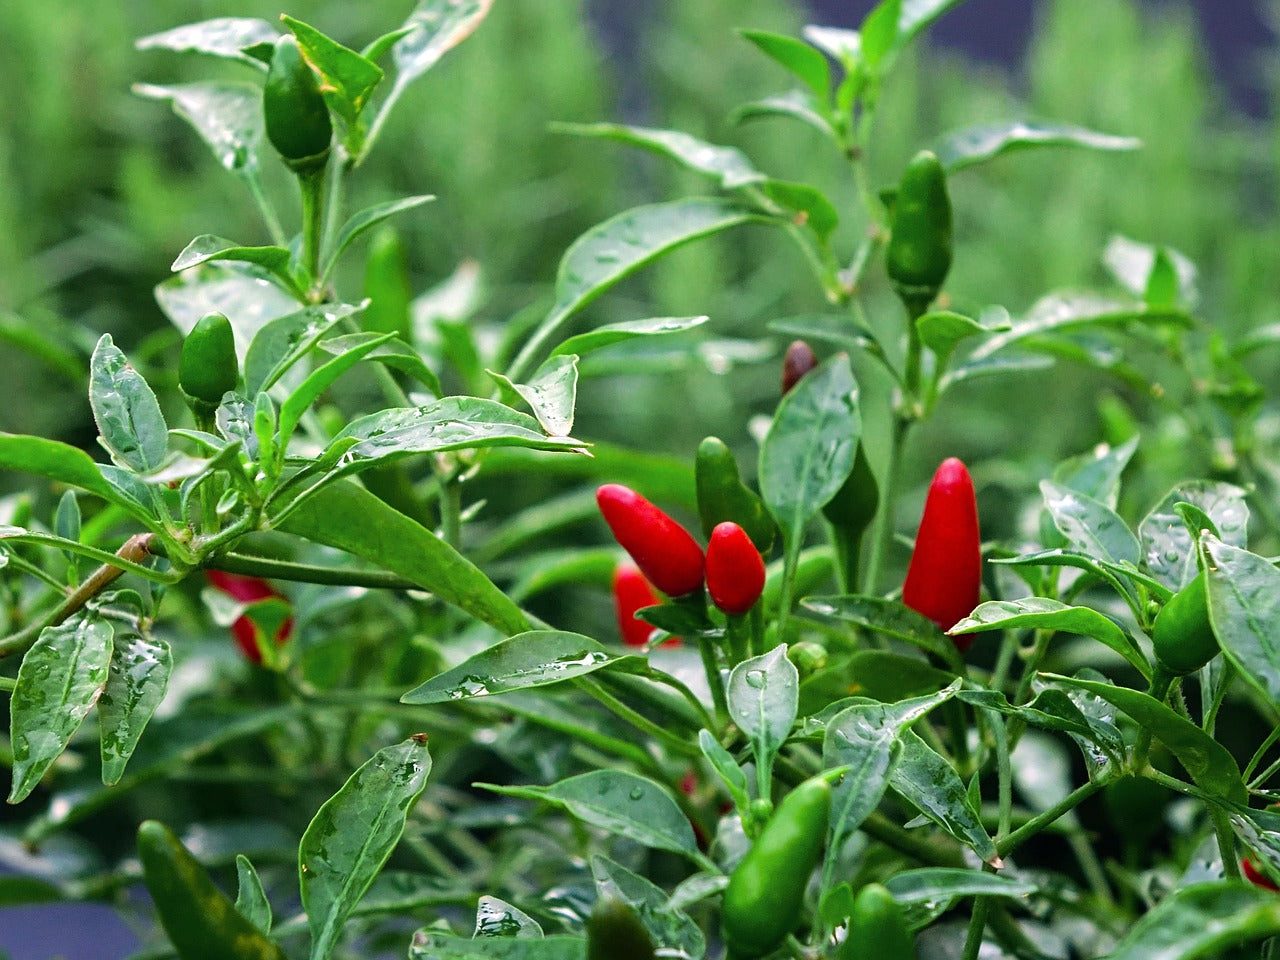 A close-up of chilli mirch